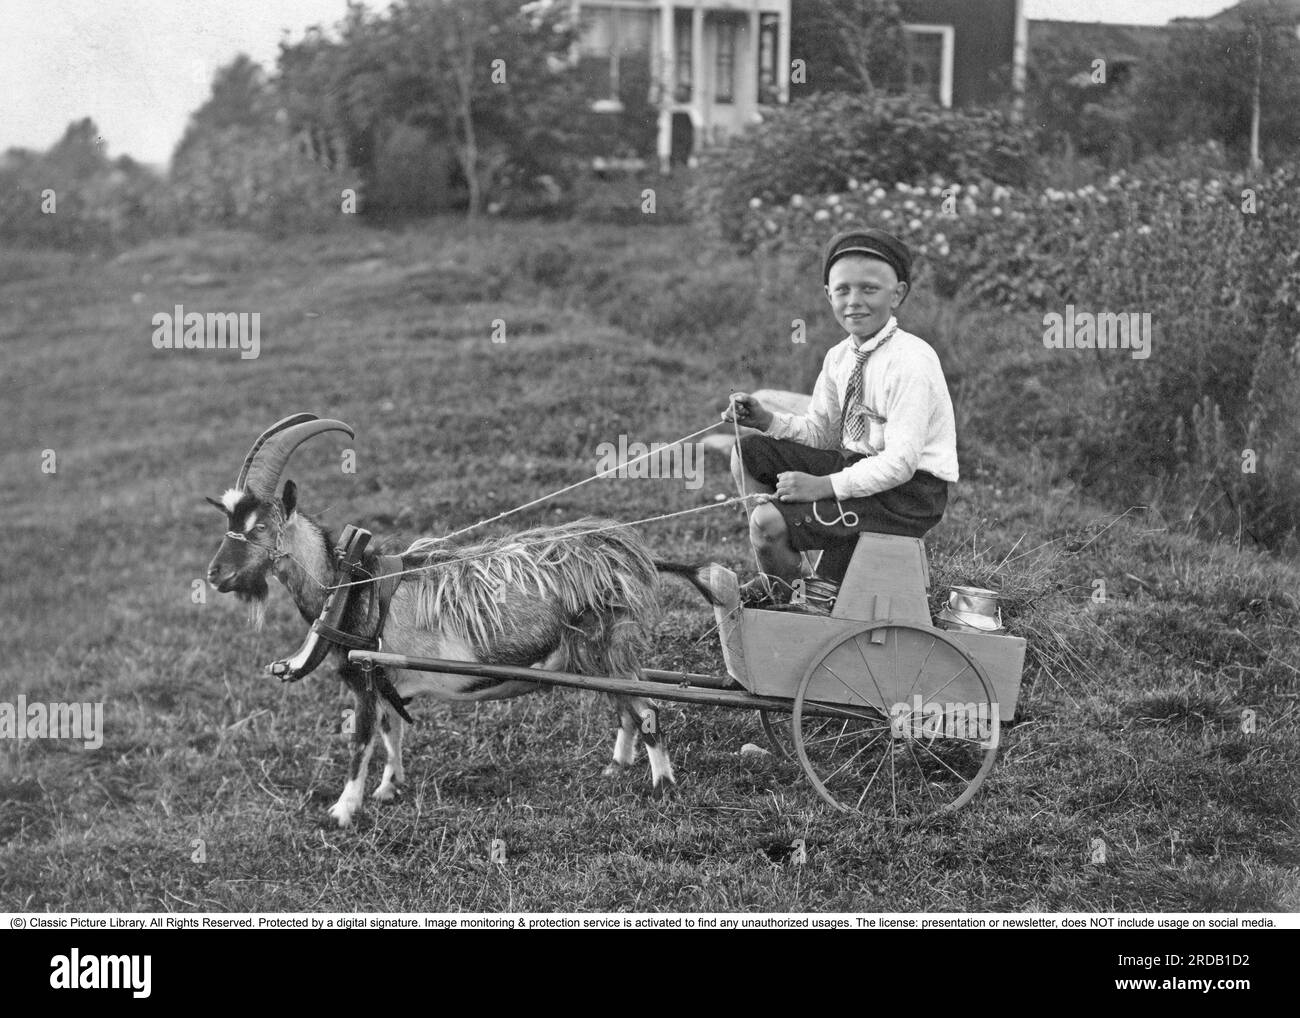 Boy in the country in the old days. A boy sits on a small cart with a milk jar / churn on the bed. A goat is harnessed in front of the wagon with harness and shackles. Such an entertaining image that shows the ingenuity and playfulness of a child. According to the caption taken in Närke Sweden in 1919 by Sam Lindskog. Stock Photo